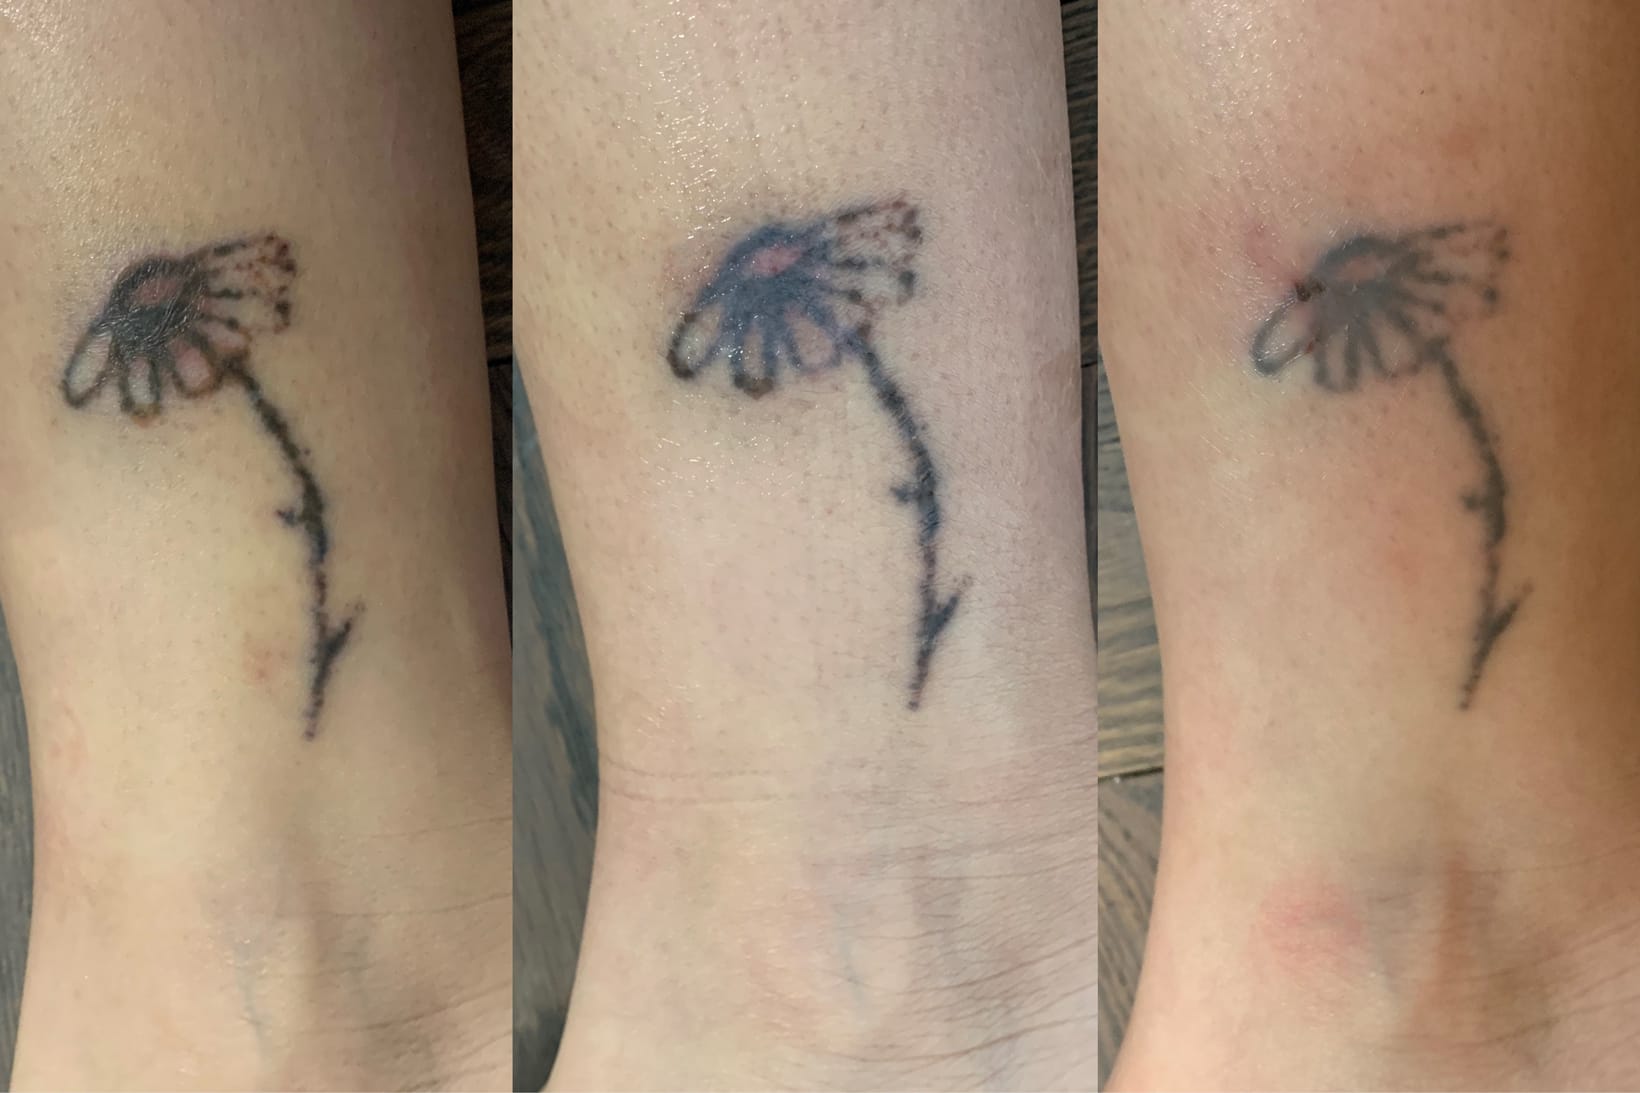 How Much Does Laser Tattoo Removal Cost? | Still Waters Day & Med Spa